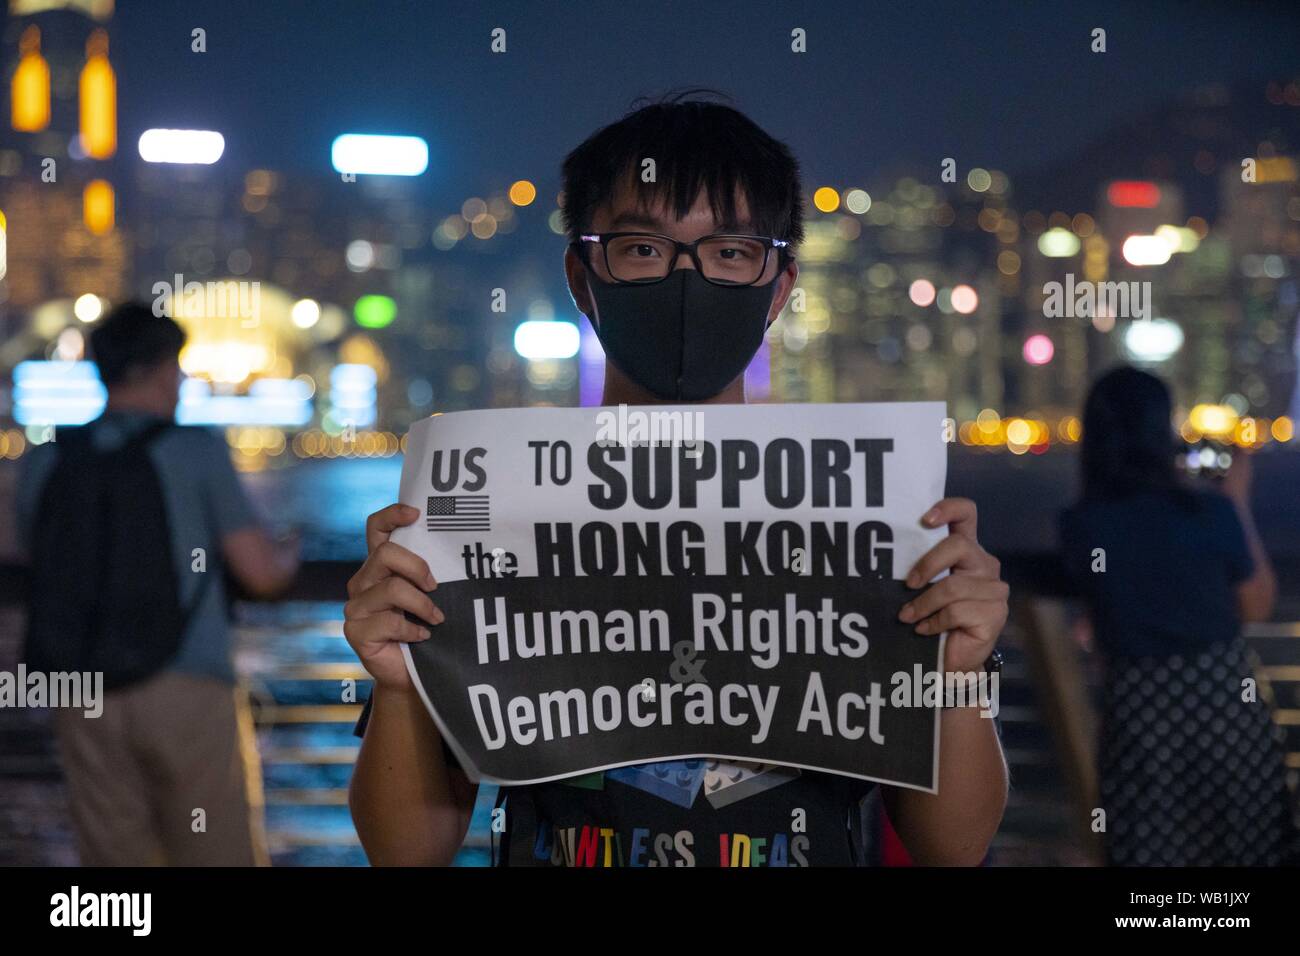 Tsim Sha Tsui, Hong Kong S.A.R. 23rd Aug, 2019. Thousands of protesters create the Hong Kong Human Chain along Hong Kong's Avenue of the Stars on the Victoria Harbor waterfront on the 30th annivesary of the Balkan Human Chain as part of the ongoing pro democracy anti elab protest movement. Credit: Adryel Talamantes/ZUMA Wire/Alamy Live News Stock Photo